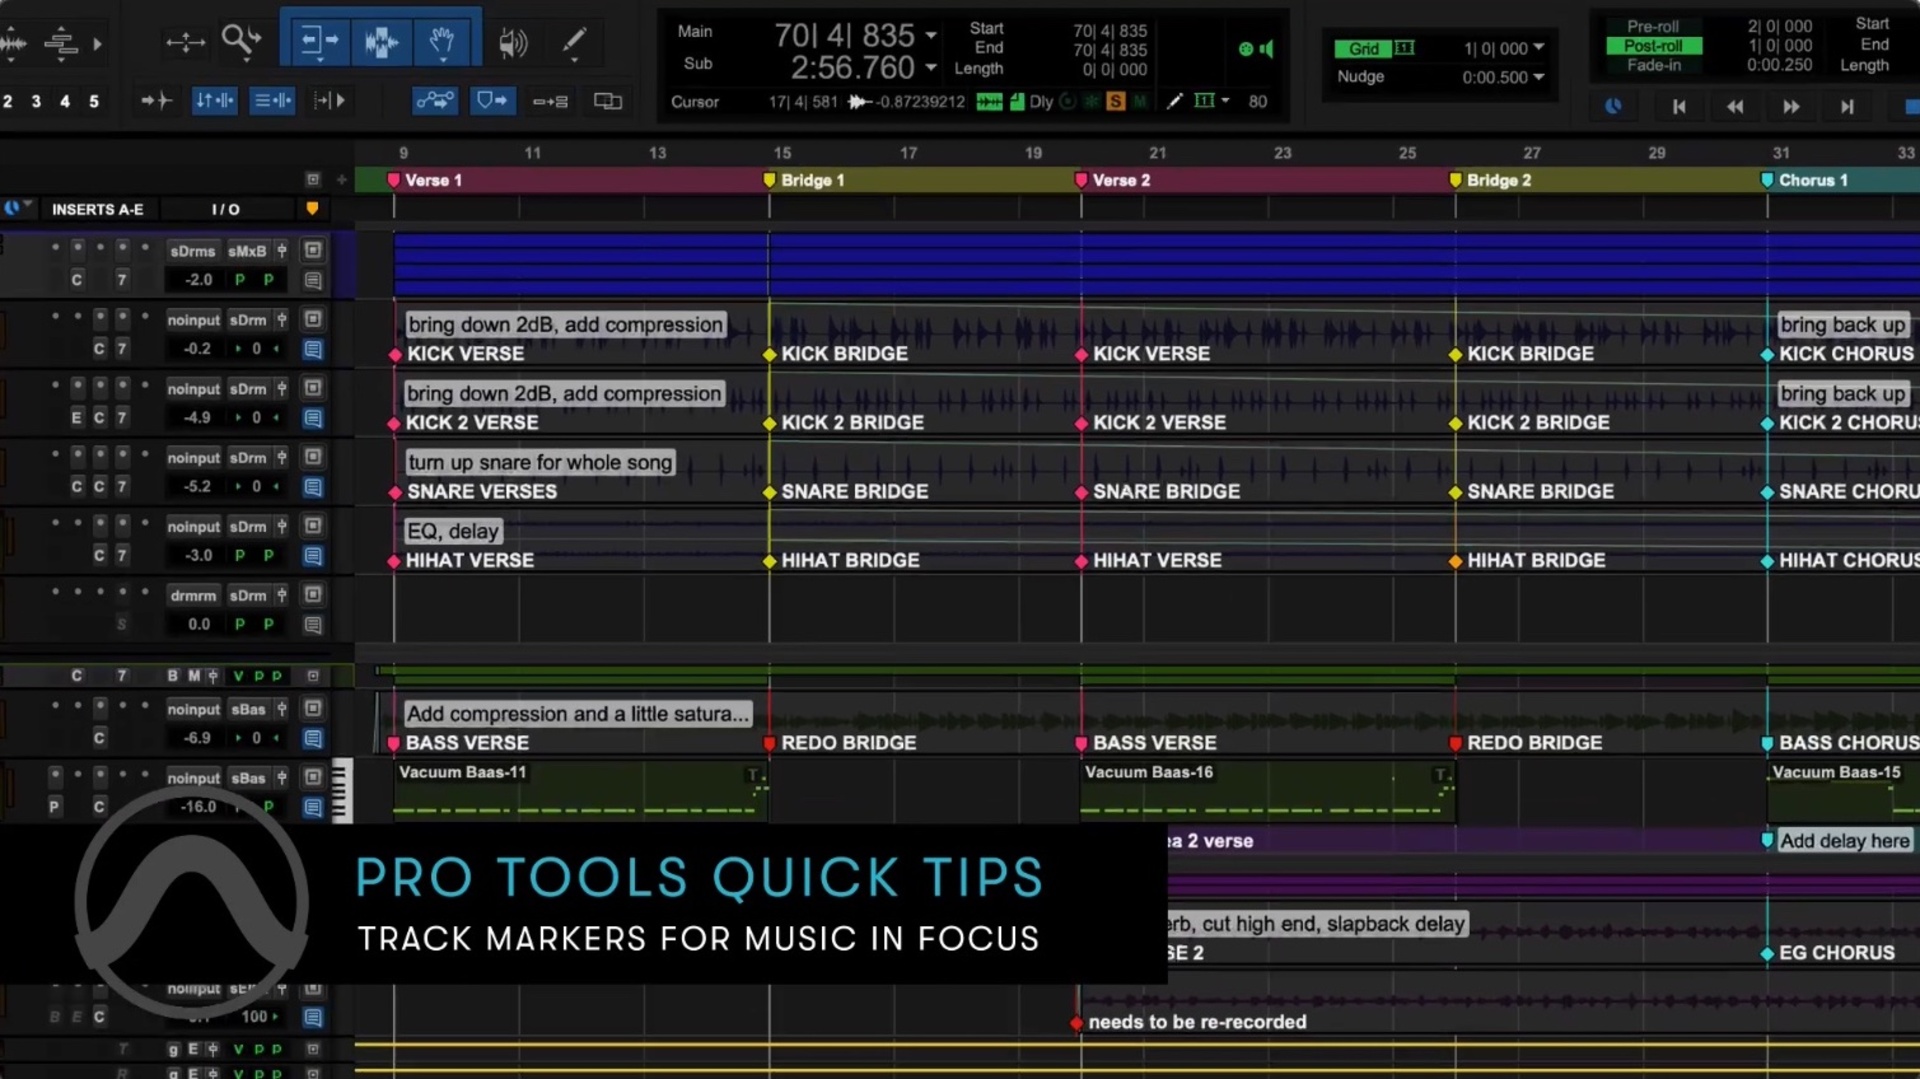 Update: Avid Pro Tools v2023.9 - New Perpetual Options and Sketch App 